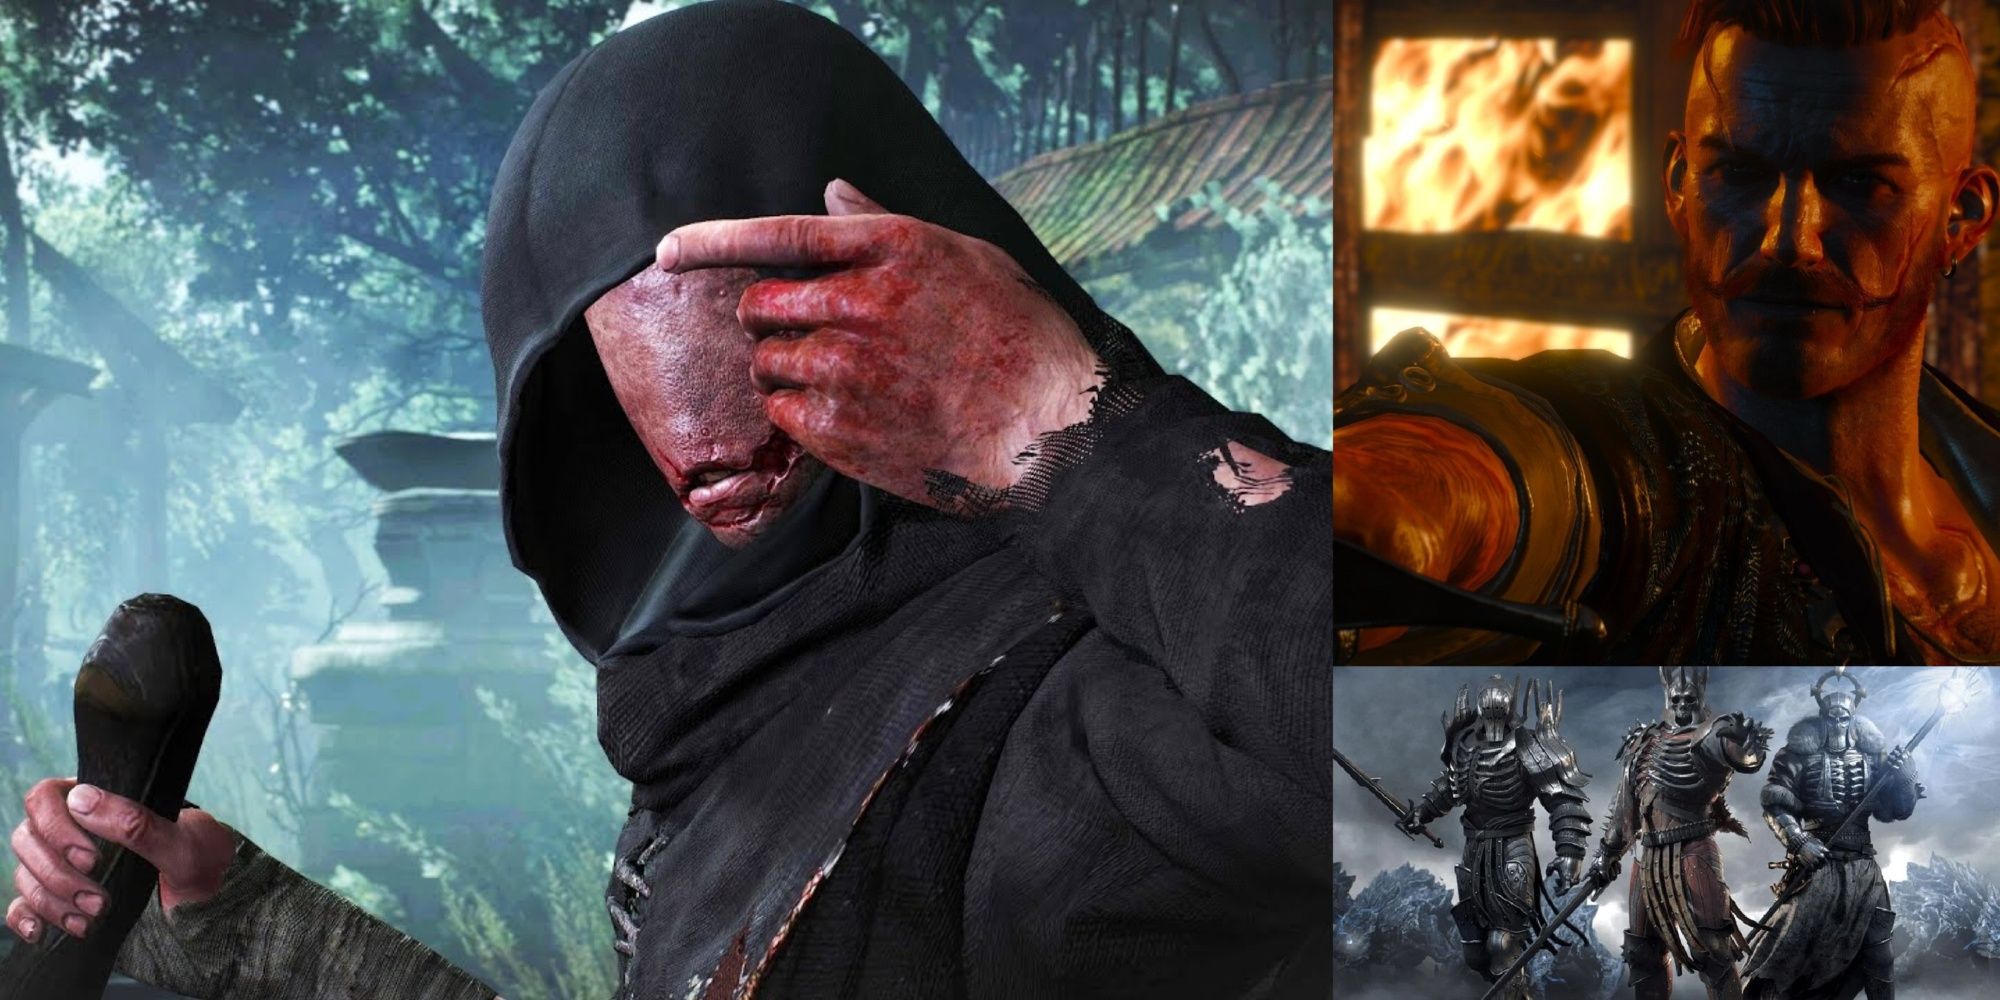 Hardest Witcher 3 Bosses Including Olgierd, The Caretaker and the Wild Hunt